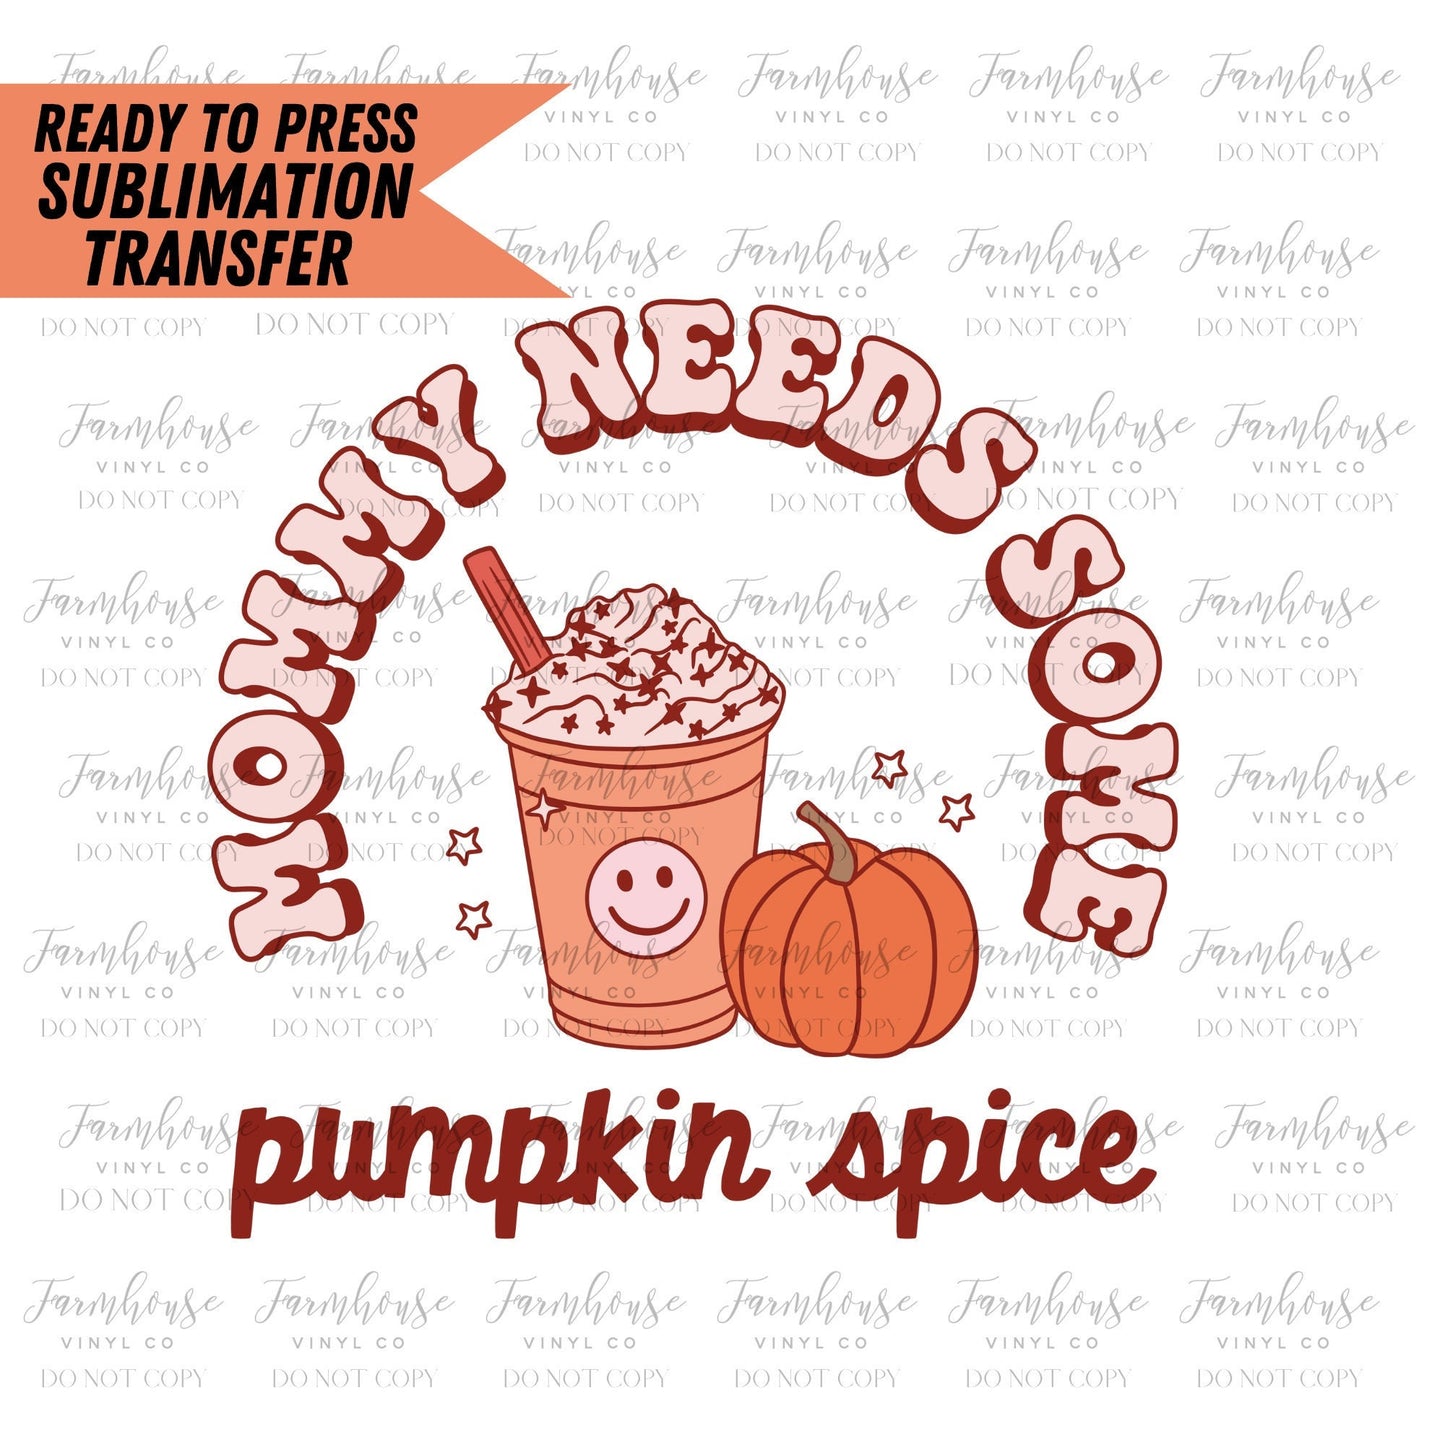 Mommy Needs Some Pumpkin Spice, Coffee Latte Lover, Ready to Press Sublimation Transfers, Sublimation design, Retro Halloween PSL Fall - Farmhouse Vinyl Co